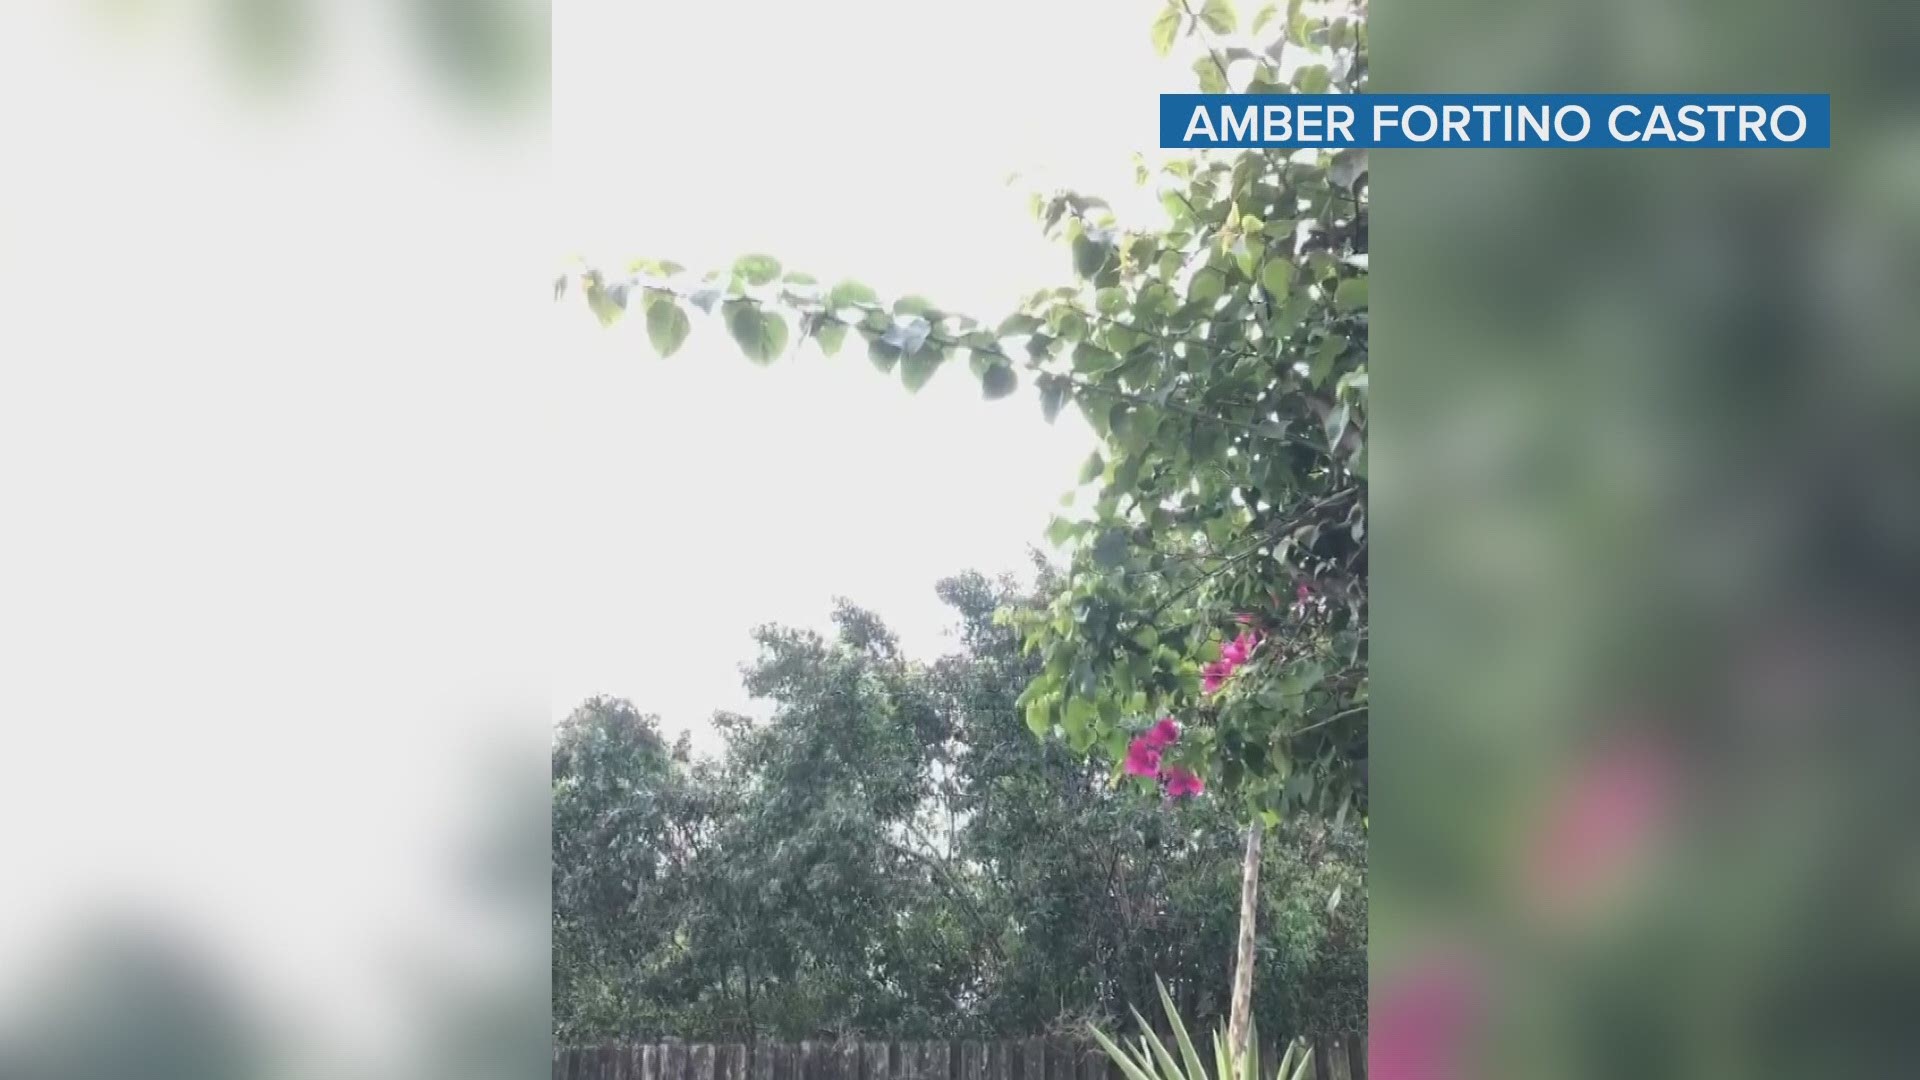 Video captured by Amber Fortino Castro showed what appears to be small snowflakes or flurries late Wednesday morning in Port St. Lucie, but it's actually graupel.